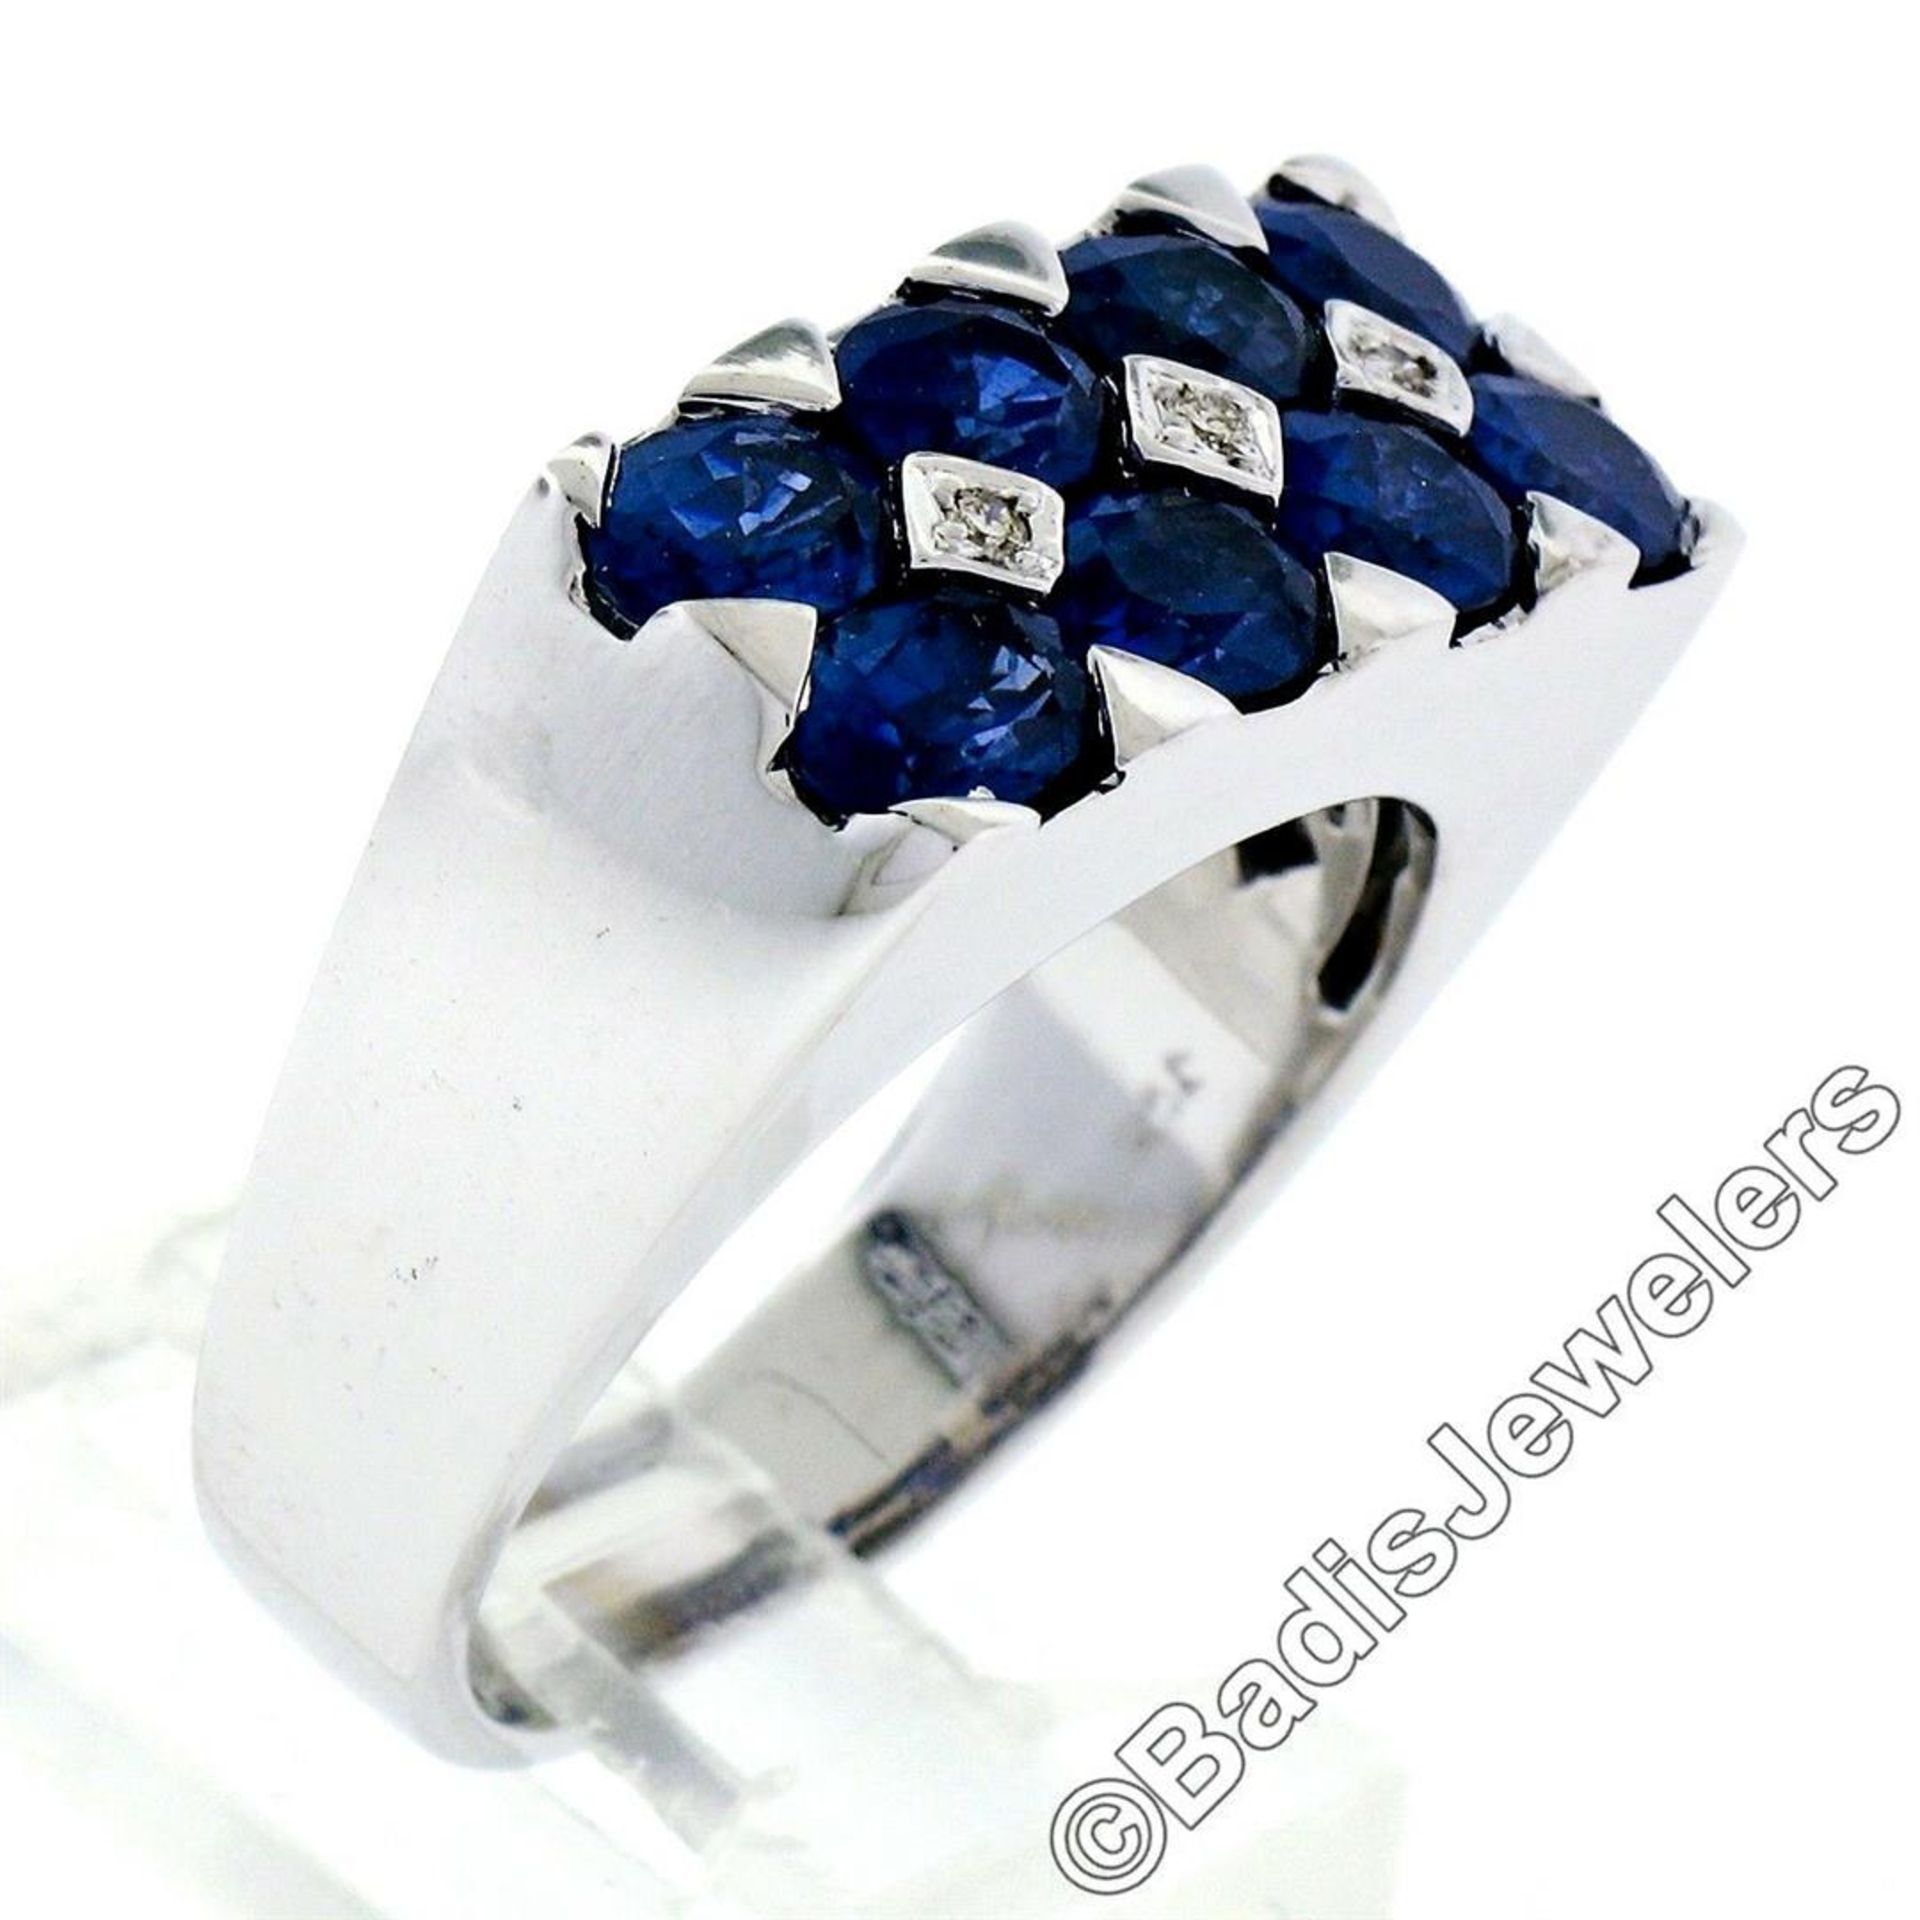 18kt White Gold 4.03ctw Dual Row Oval Cut Sapphire & Diamond Band Ring - Image 5 of 9